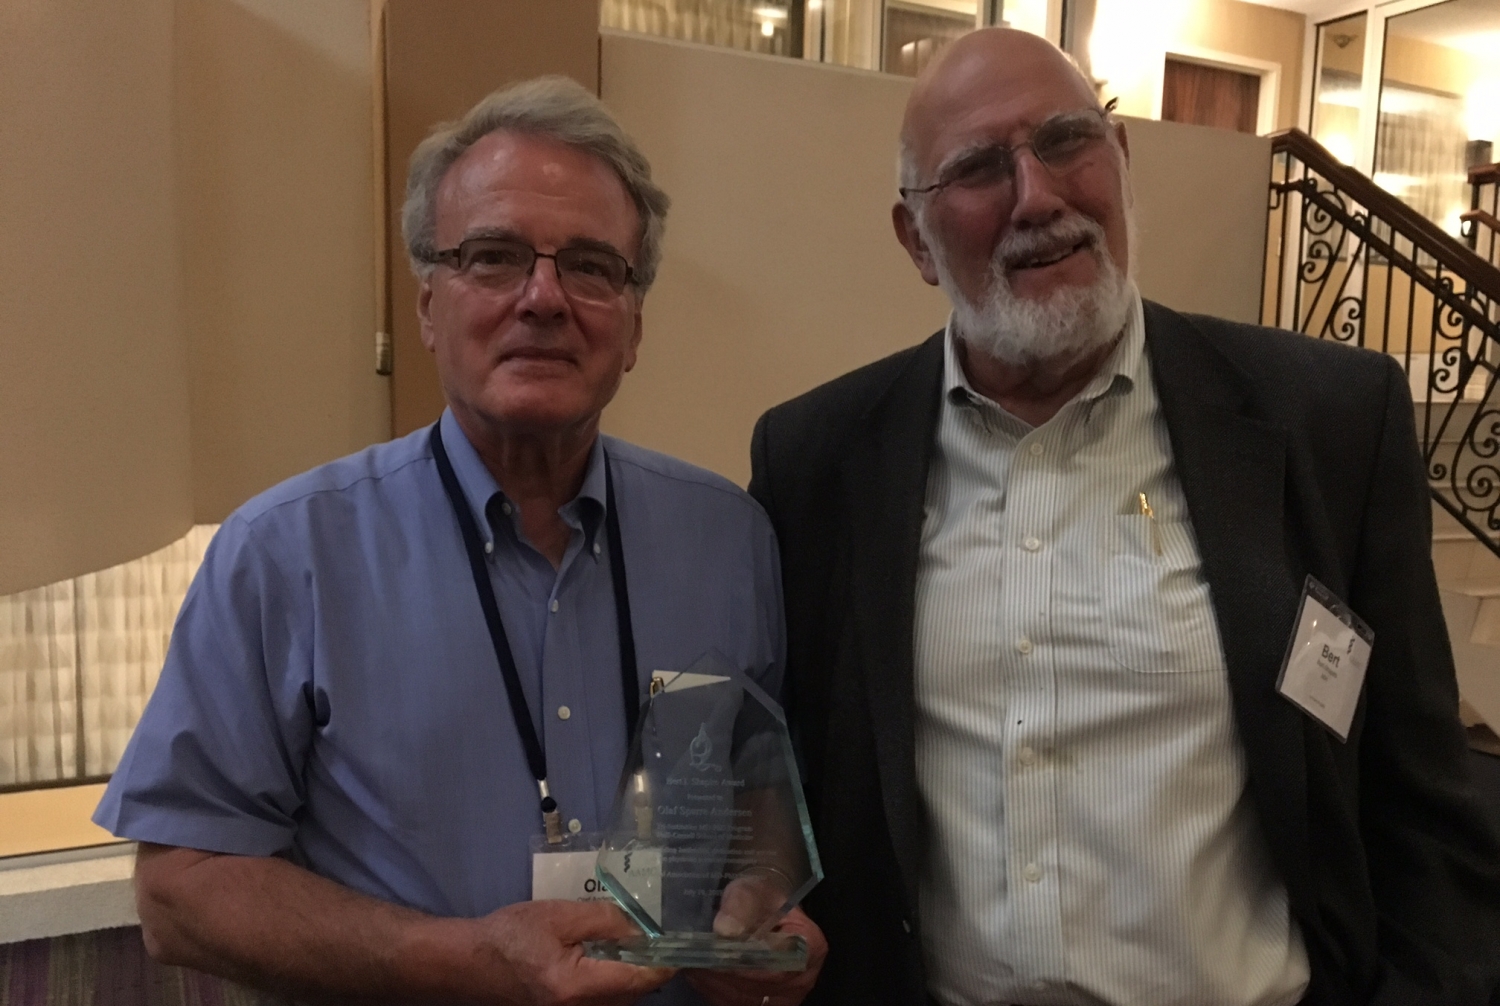 Dr. Olaf Andersen, left, with Dr. Bert I. Shapiro. Photo credit: Dr. Ruth Gotian